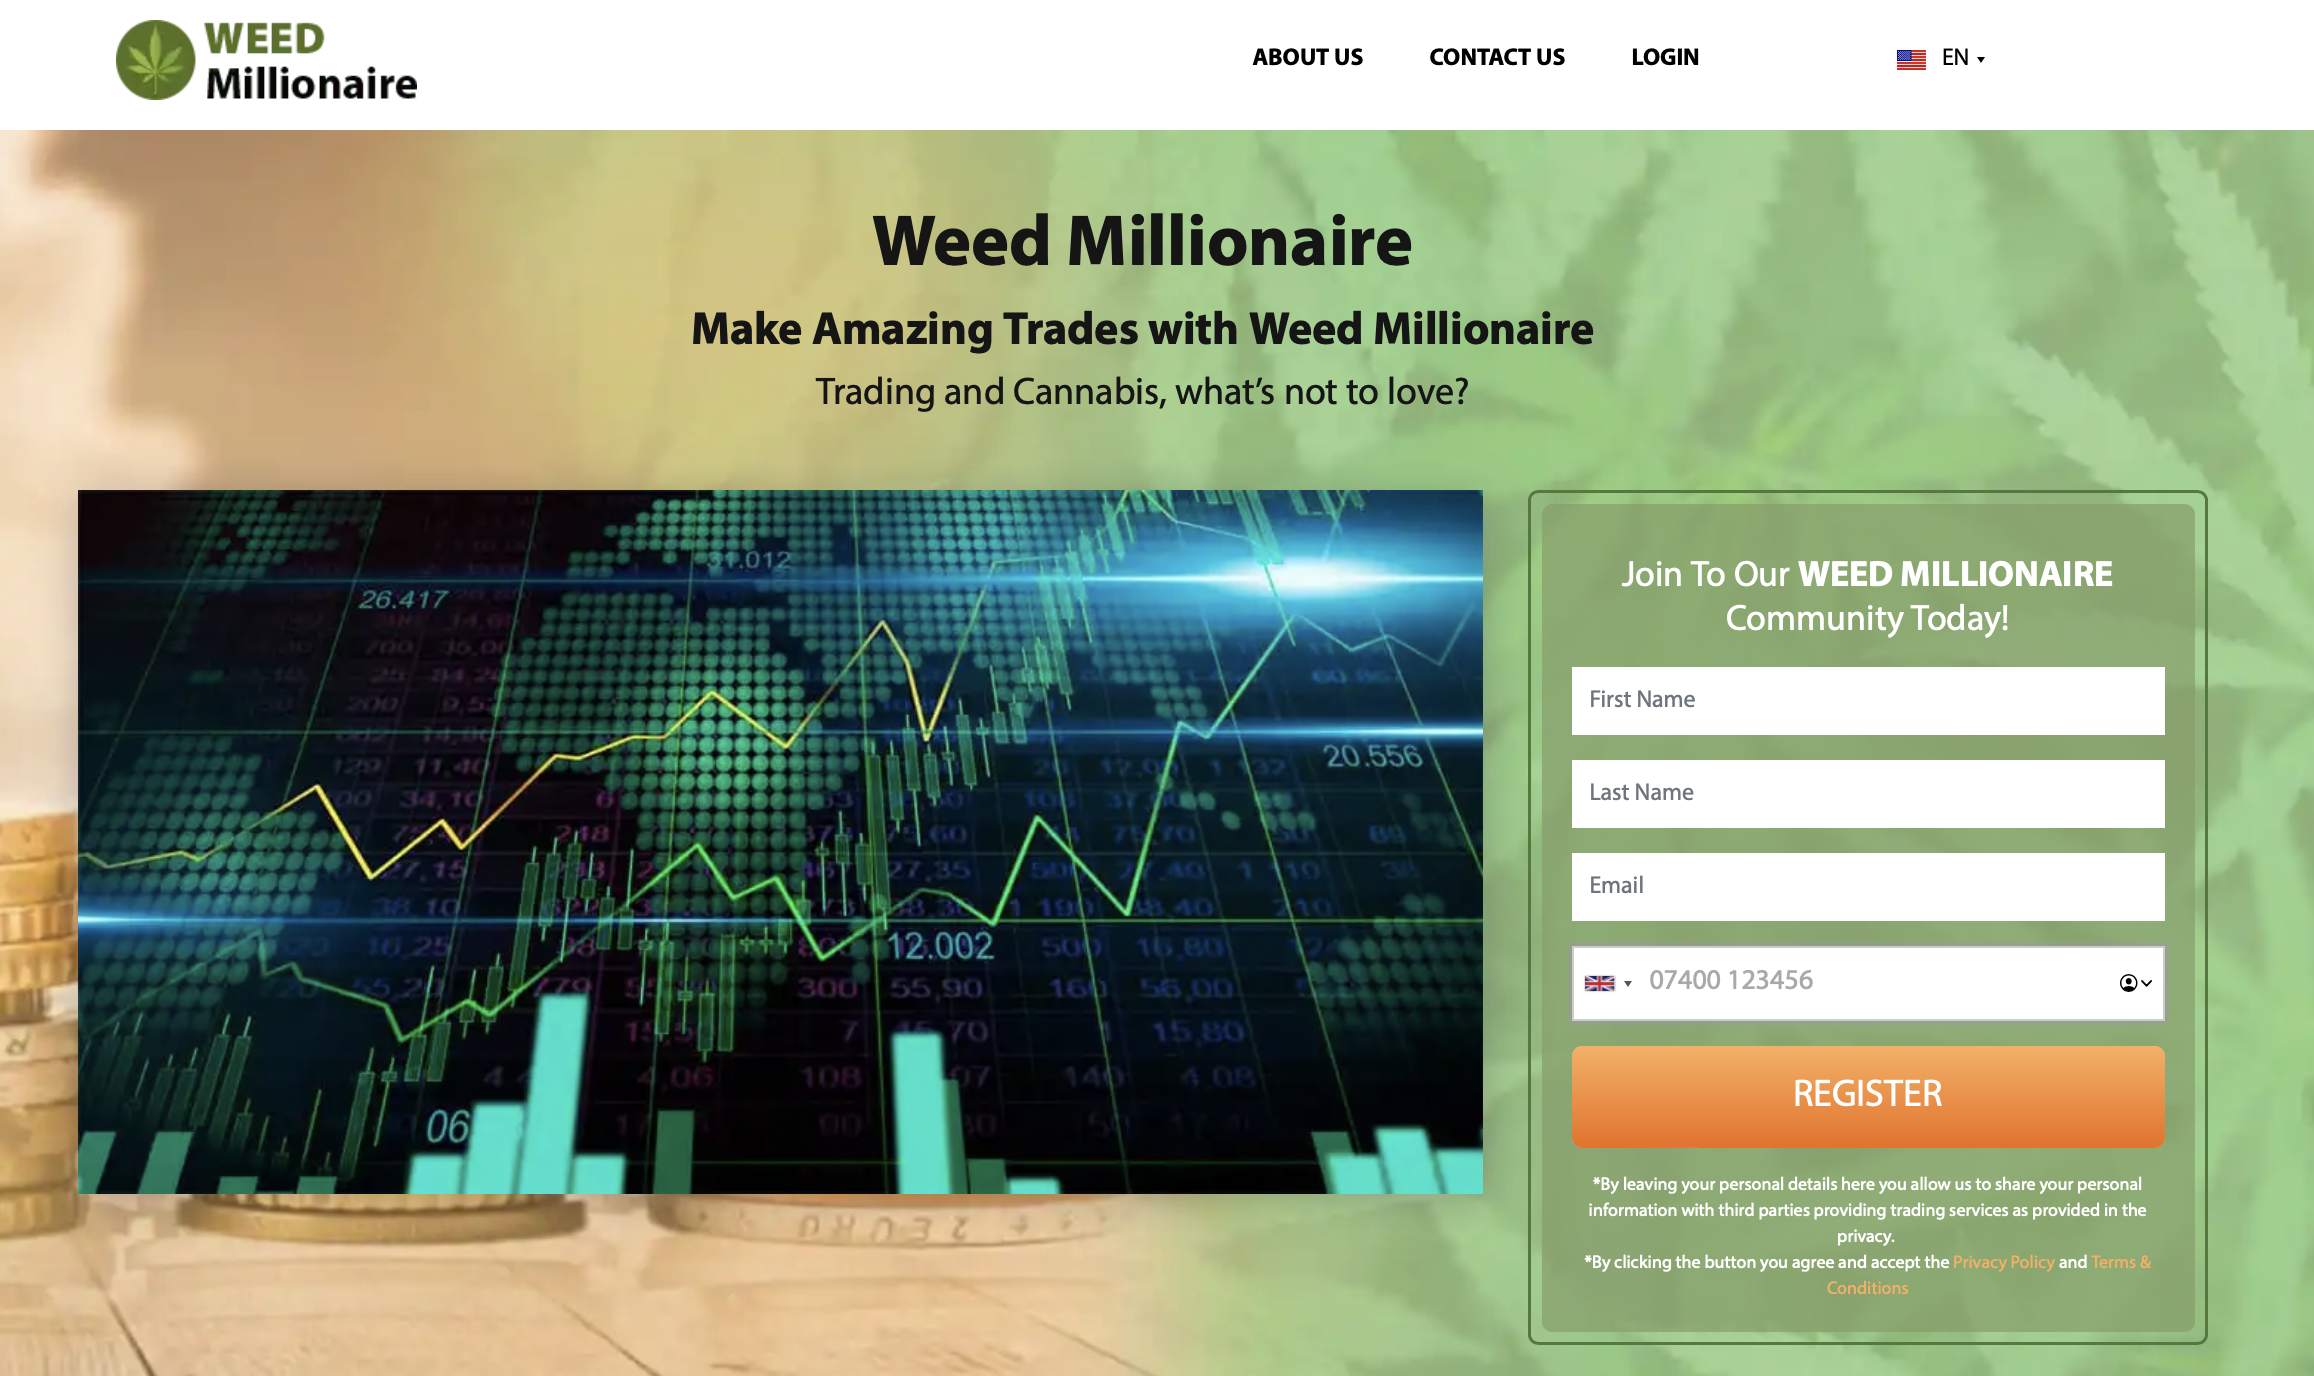 The official website of Weed Millionaire